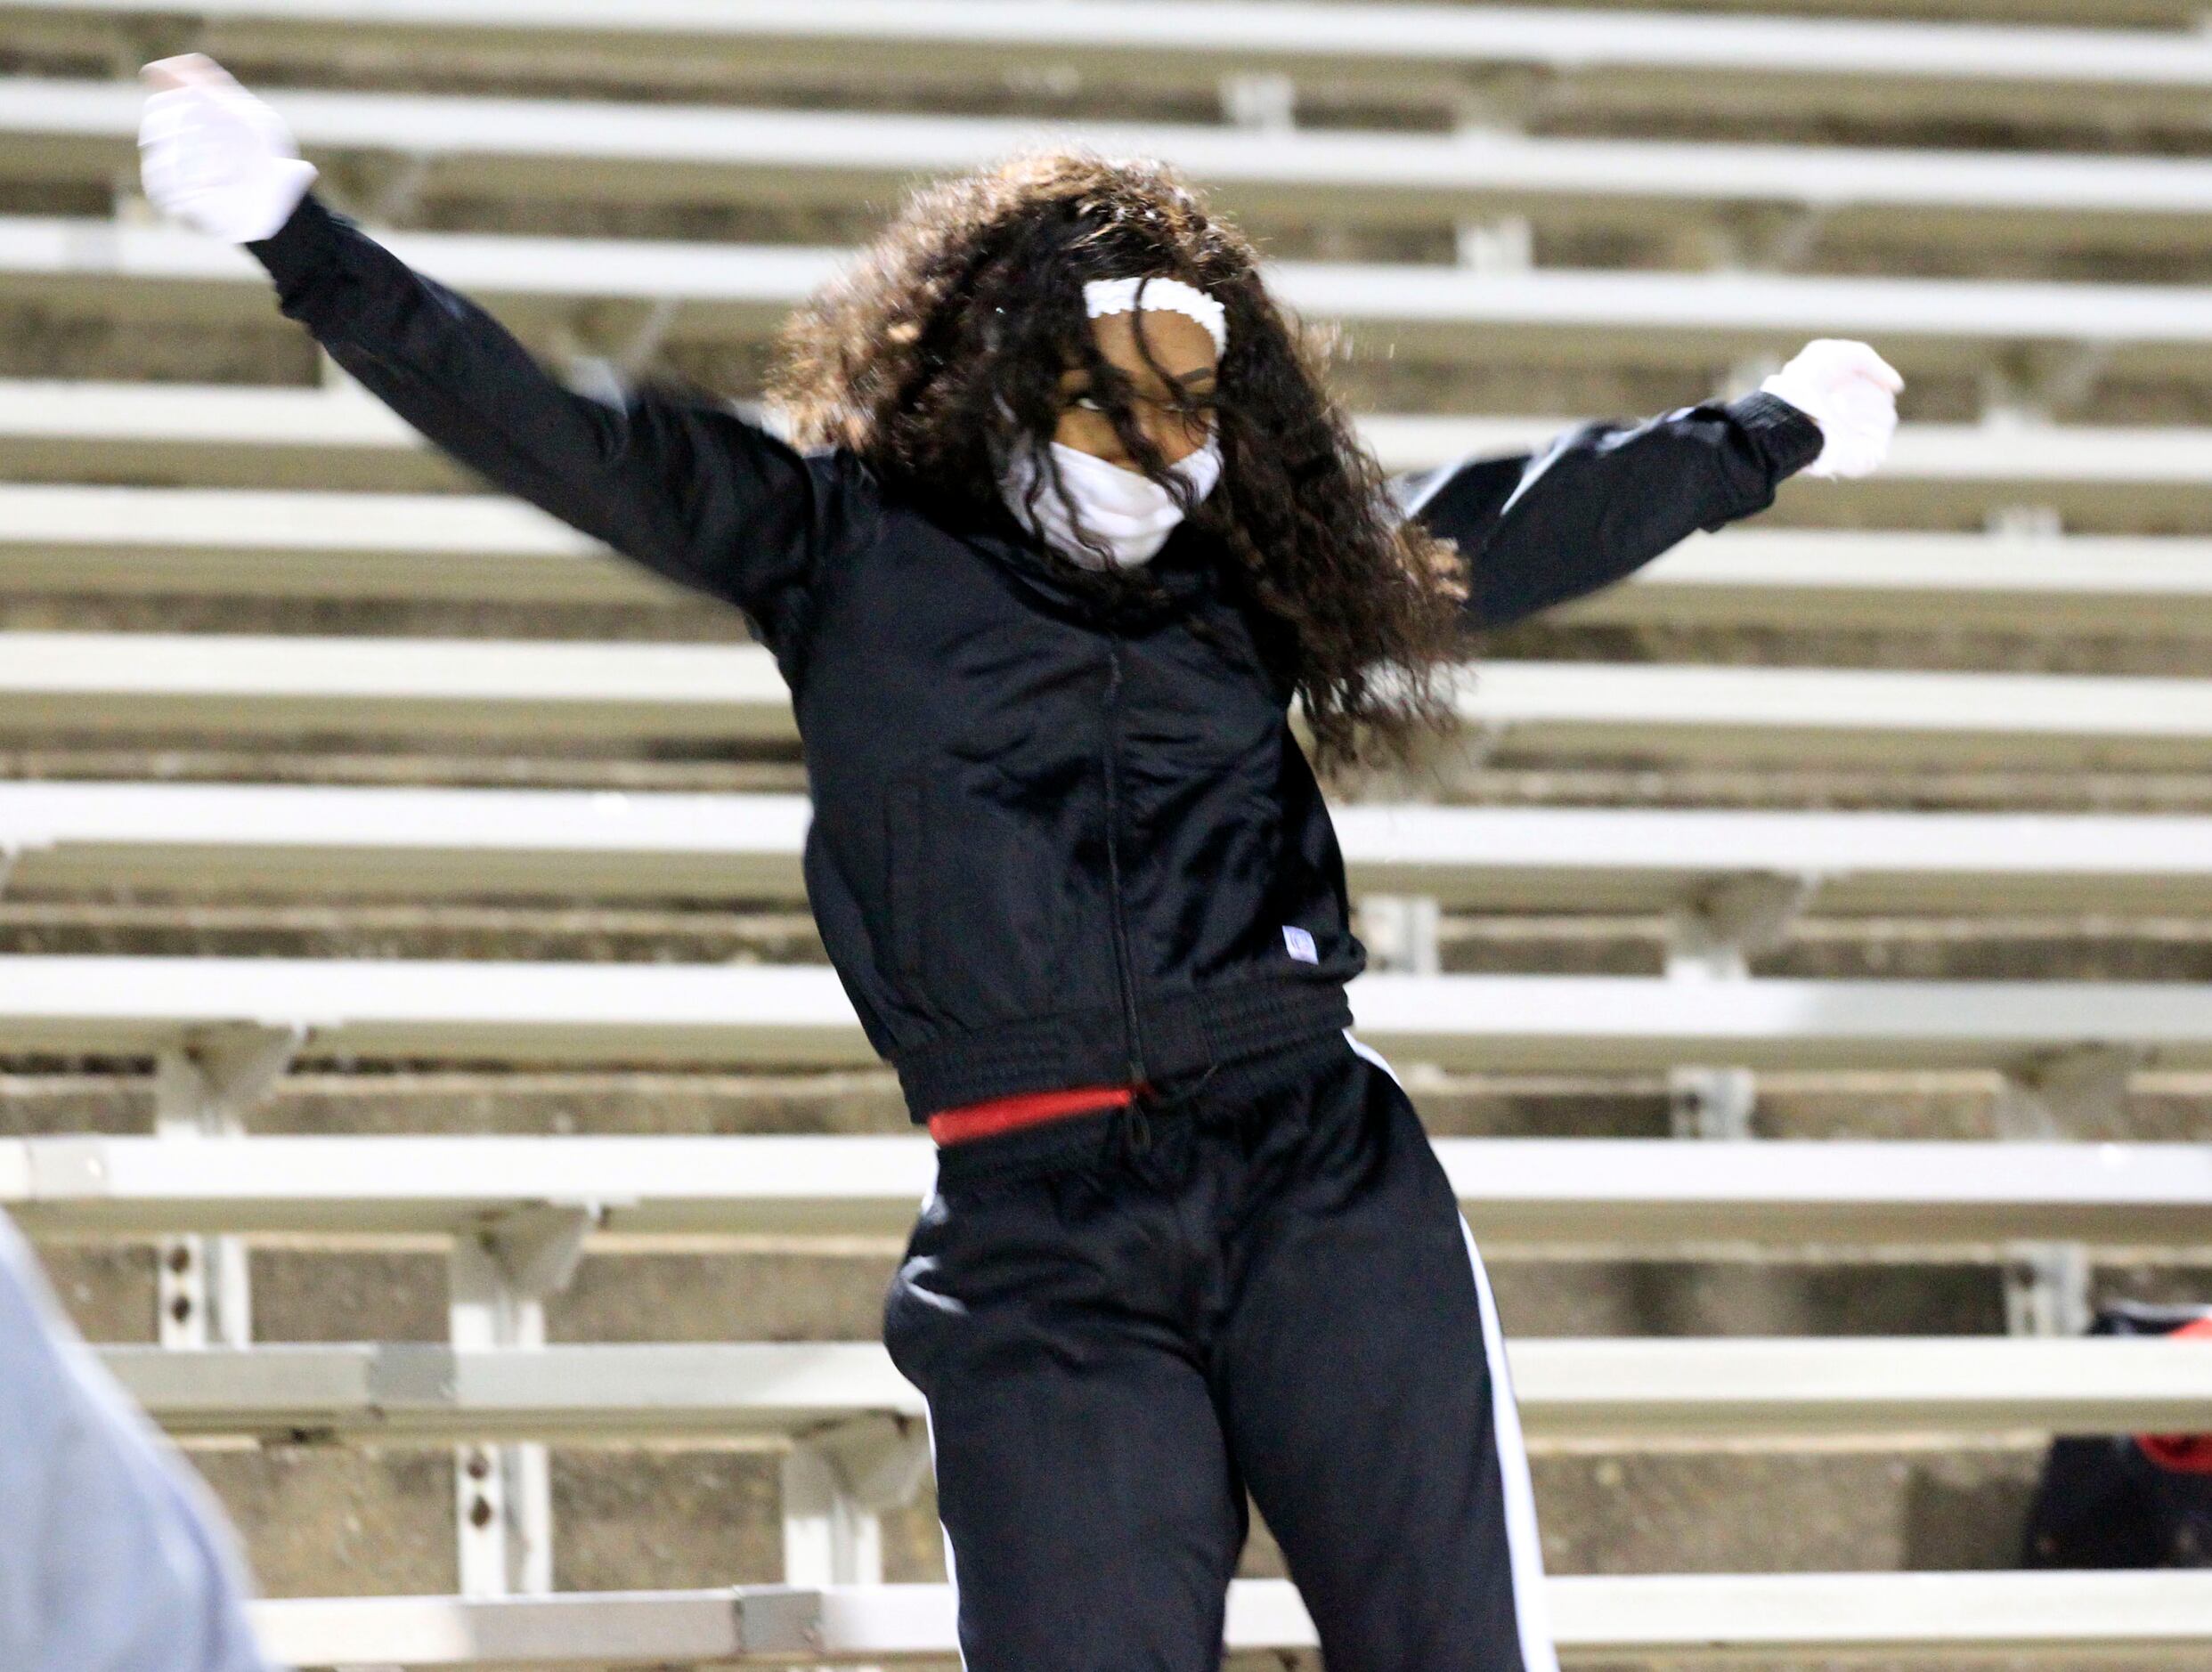 A Skyline performer dances in the stands during the first half of a high school football...